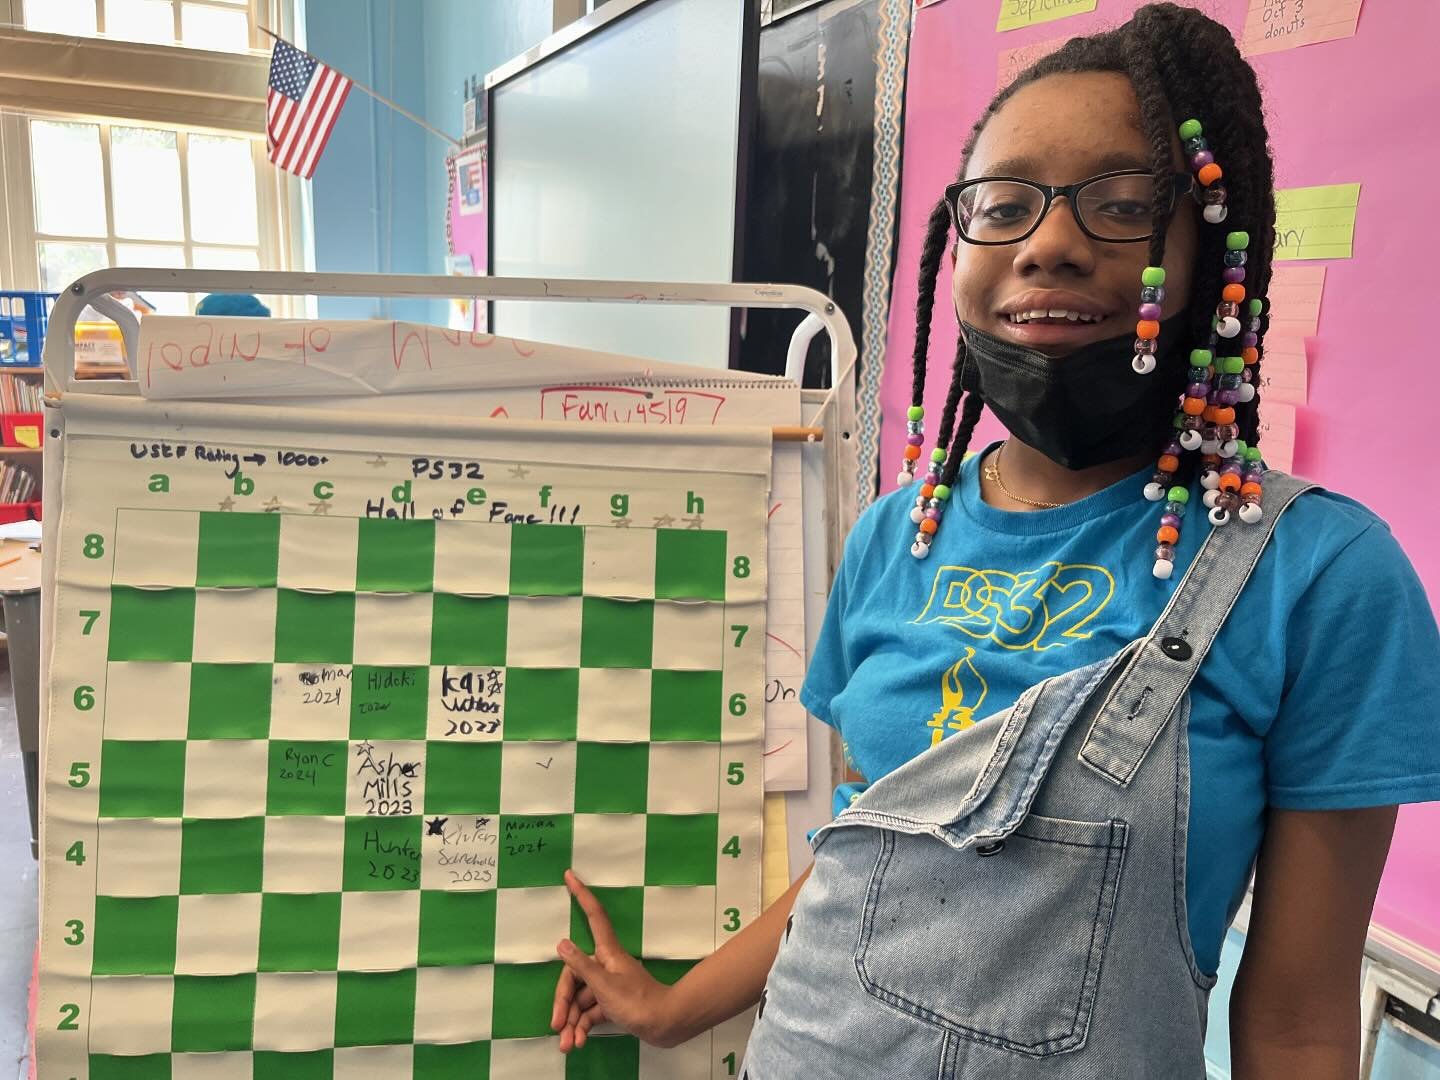 Congratulations to PS32&rsquo;s Mariam for breaking 1000 USCF at the Brooklyn Cup this past weekend! Mariam becomes the first girl to sign the board in 32 program history 🎉

Mariam graduates in style by adding her name to the legendary 64 square che